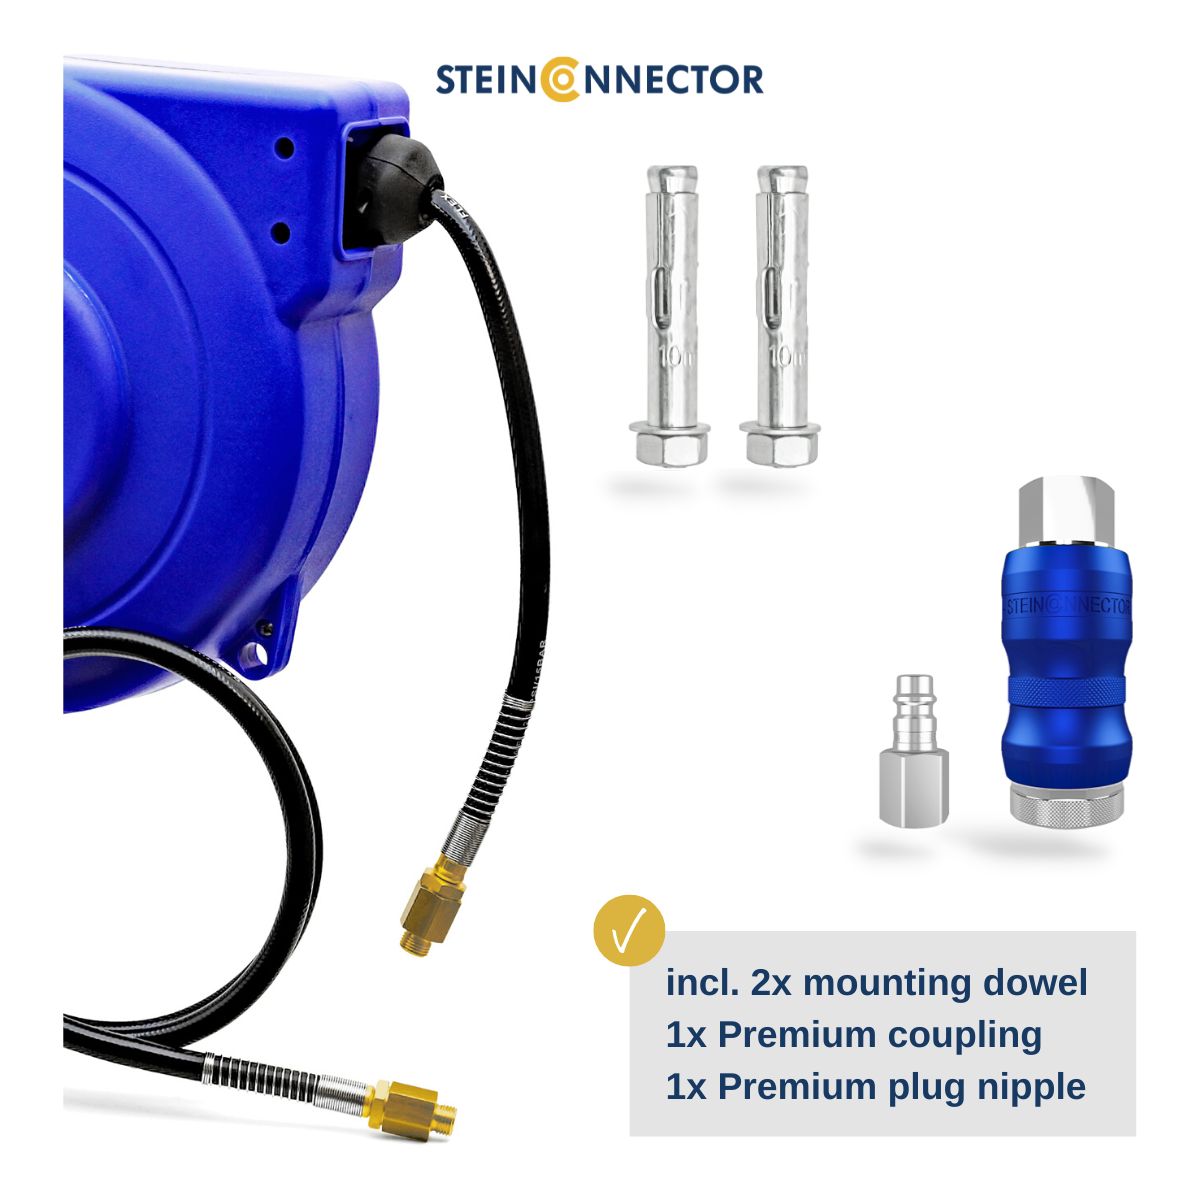 Steinconnector Profi automatic hose reel in 8 and 15 m hose length - Premium pneumatic hose reel with wall bracket, mounting dowel, Porfi compressed air coupling and plug-in nipple